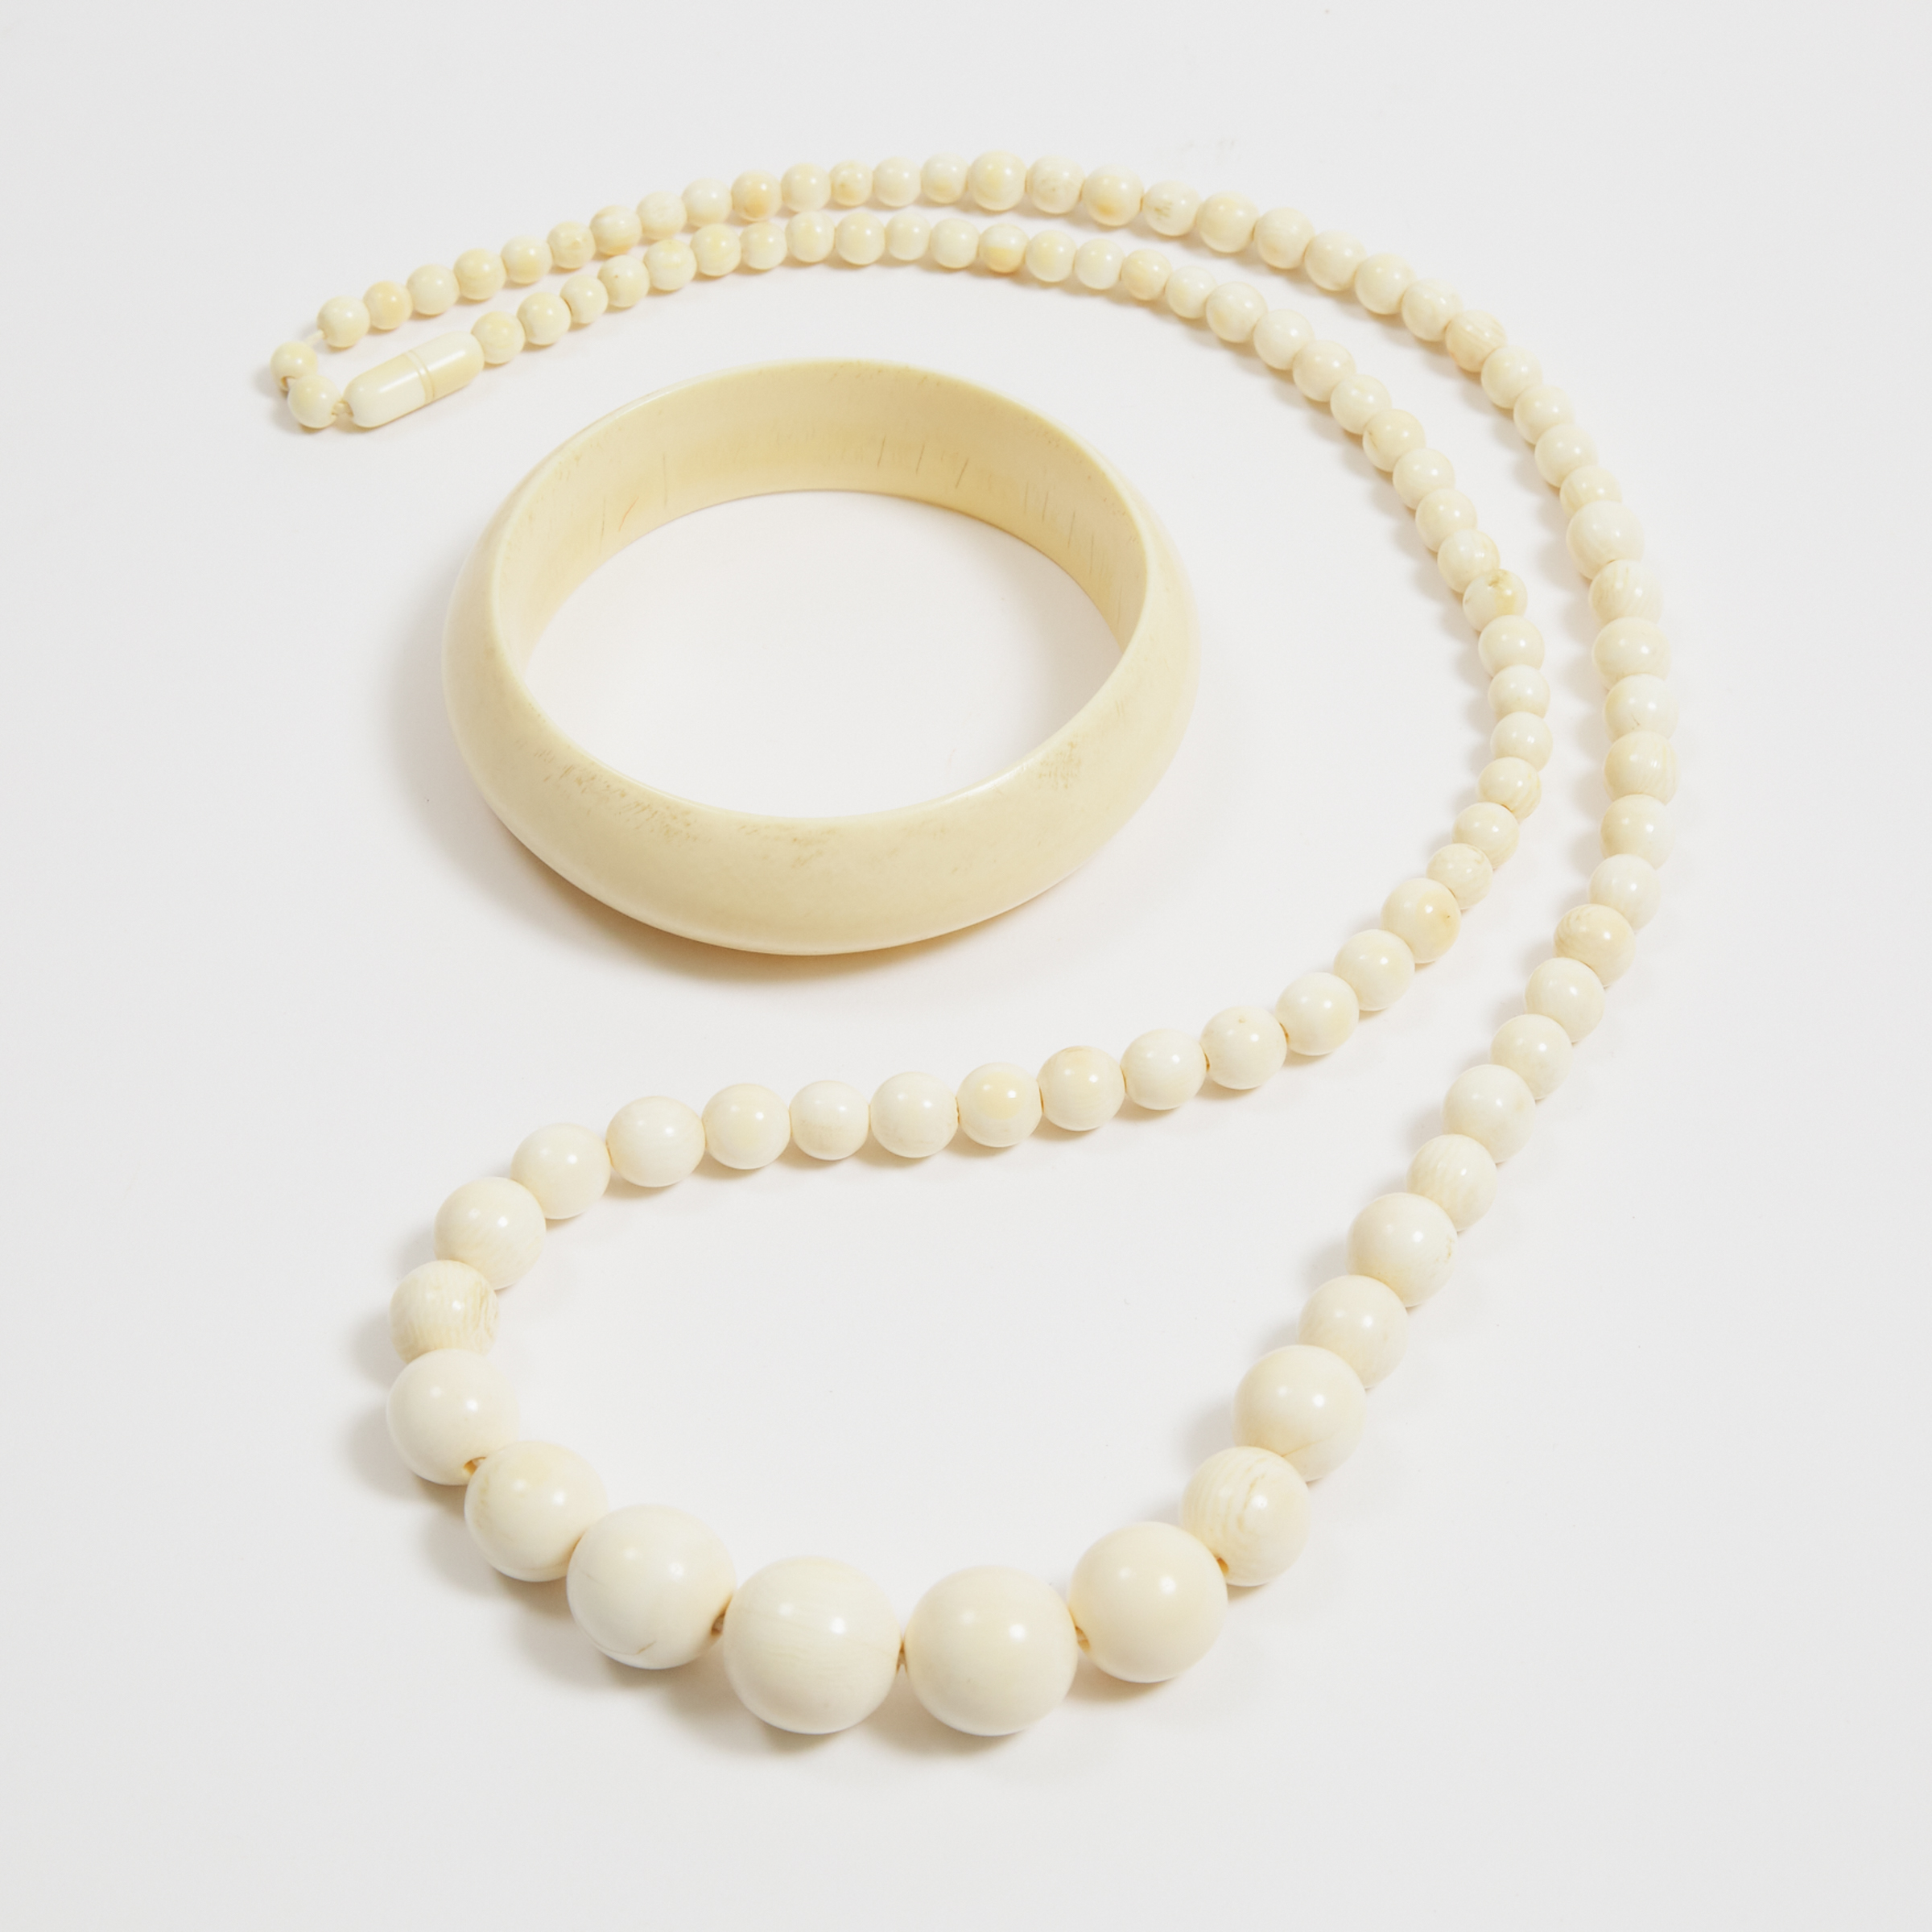 An Ivory Beaded Necklace and Bangle, Early 20th Century